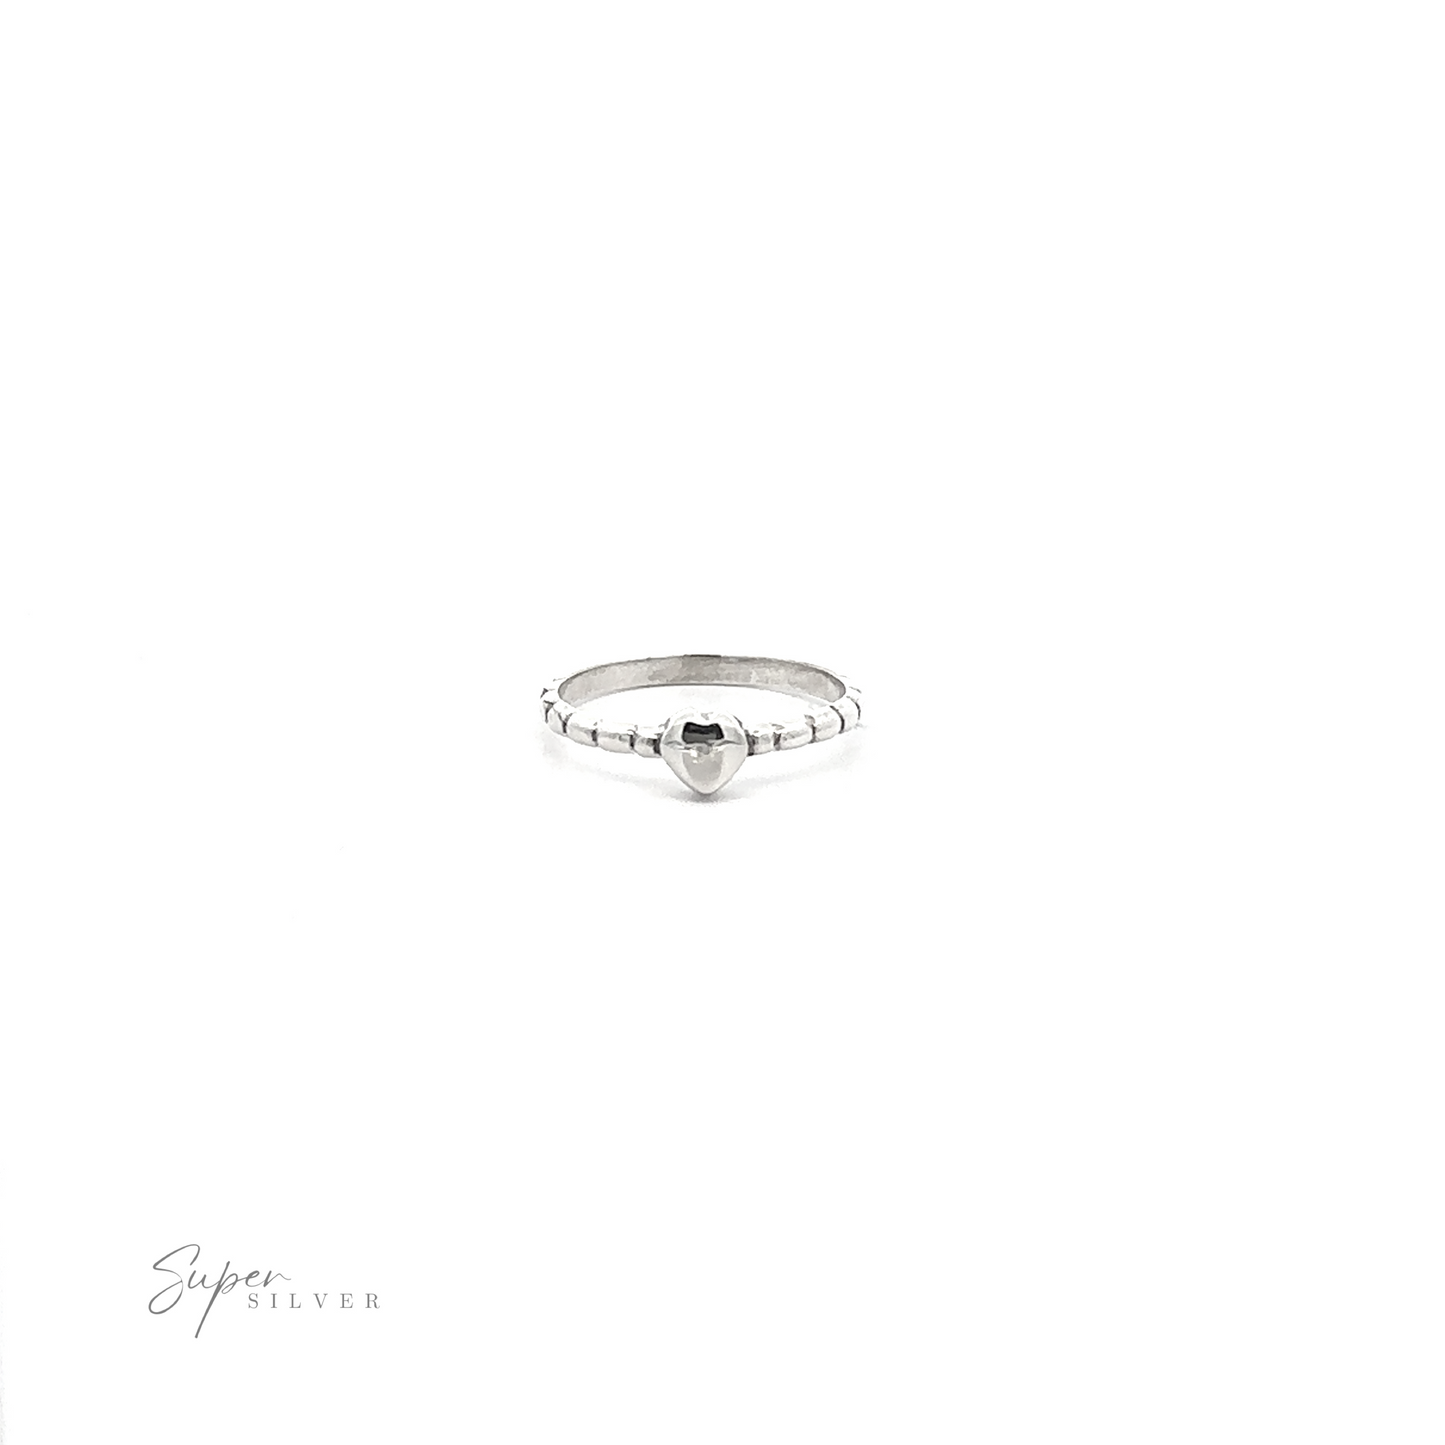 
                  
                    Petite Patterned Heart Band ring with a twisting band motif on a white background, with "super silver" written in cursive at the bottom.
                  
                